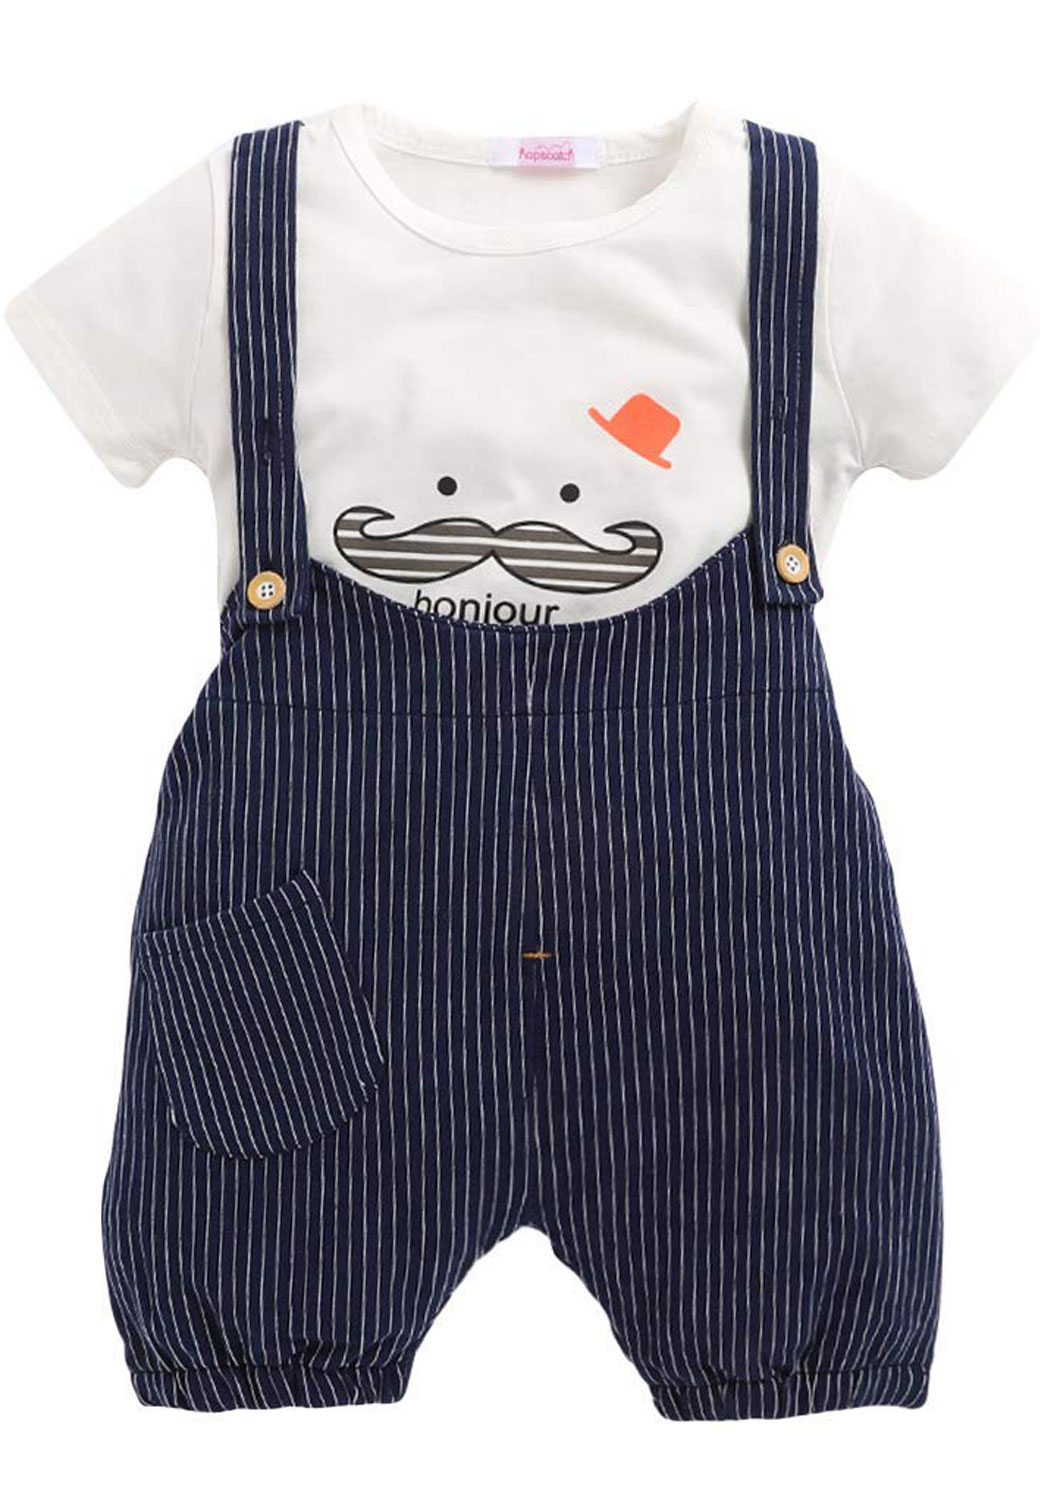 Babies Trousers5